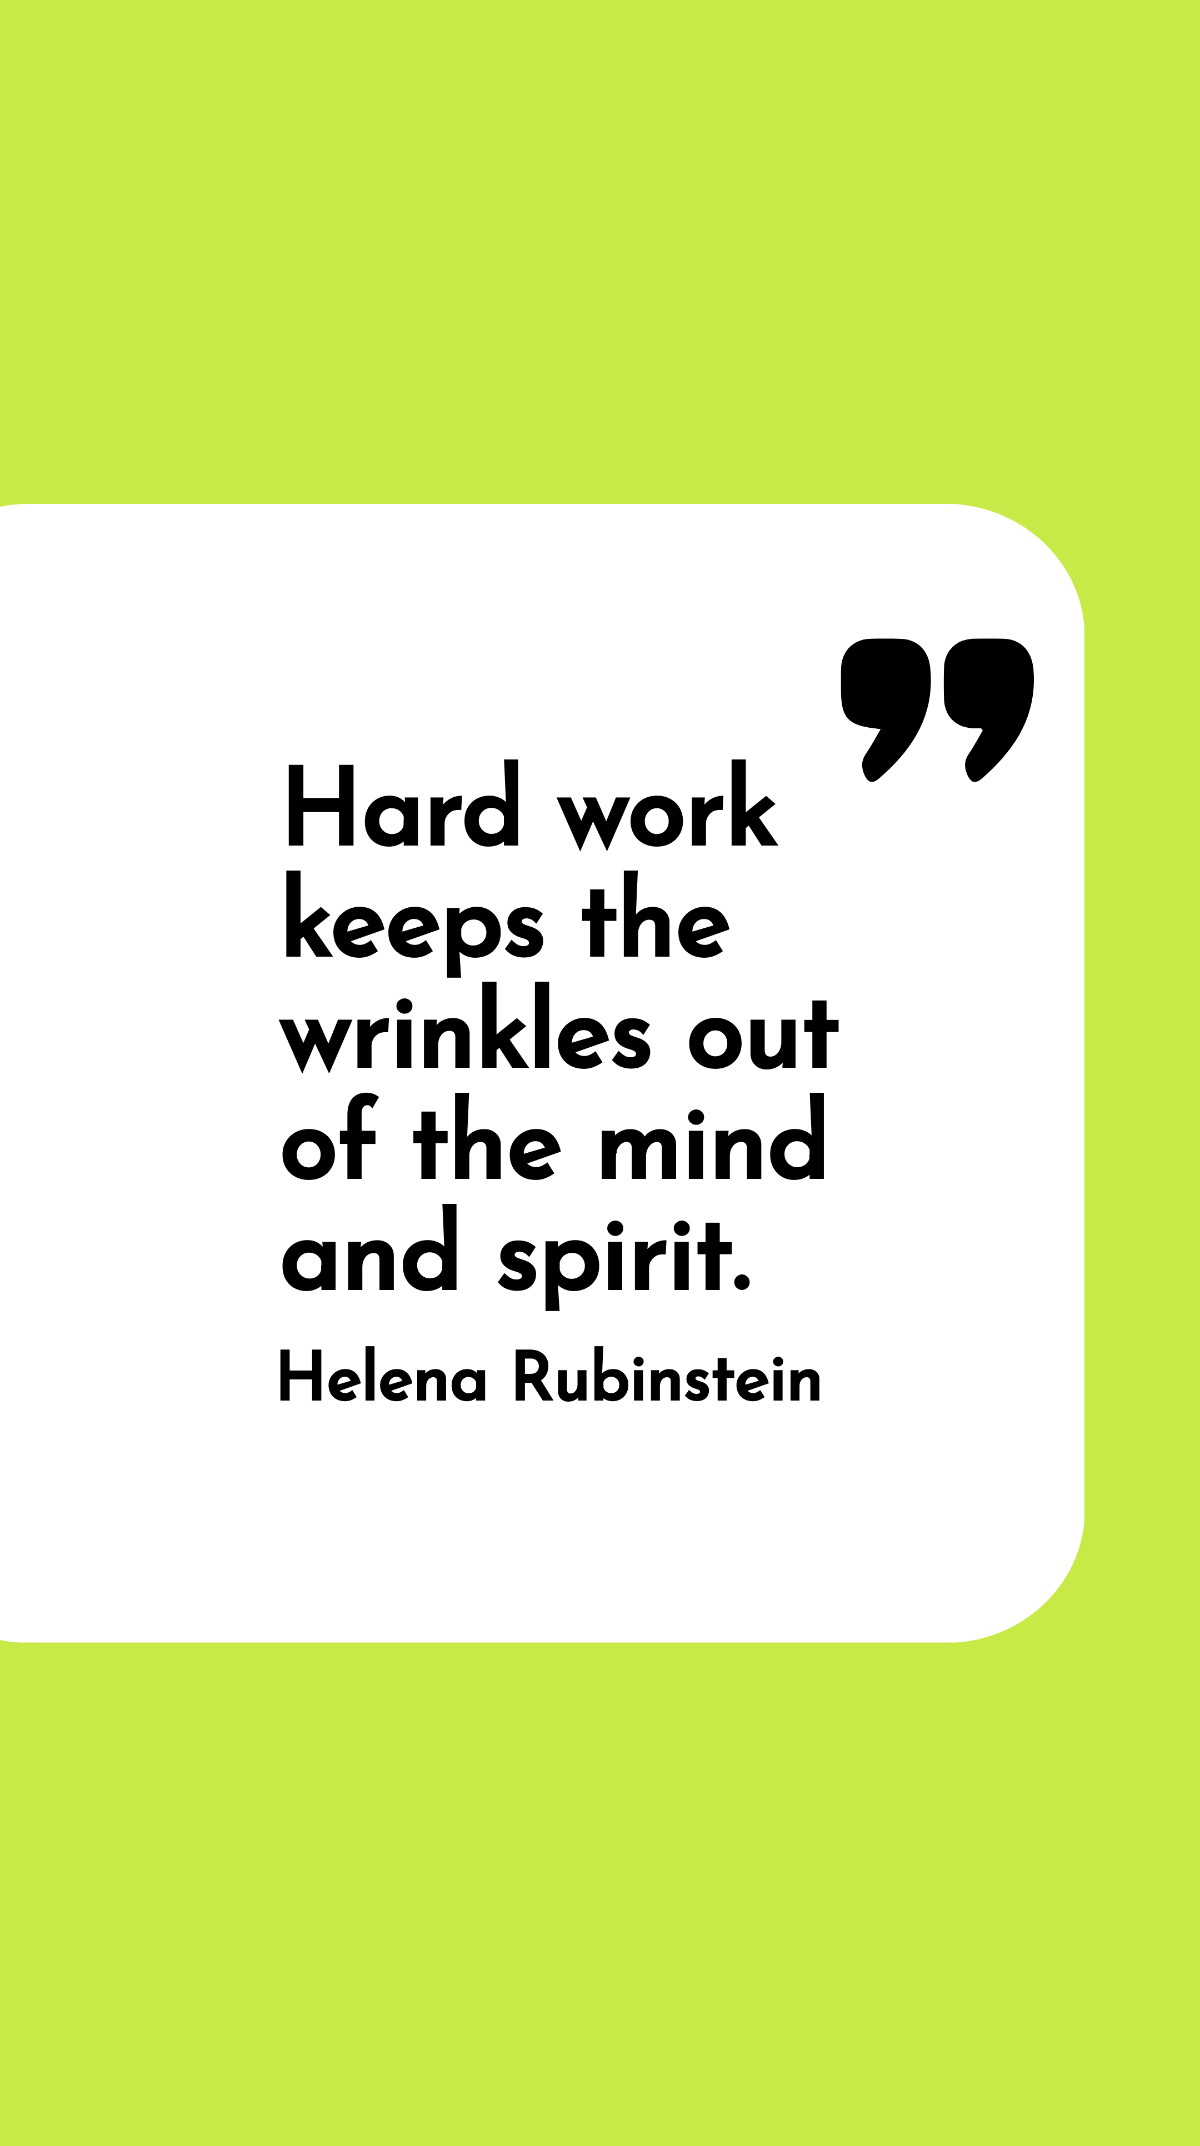 Helena Rubinstein - Hard work keeps the wrinkles out of the mind and spirit. Template